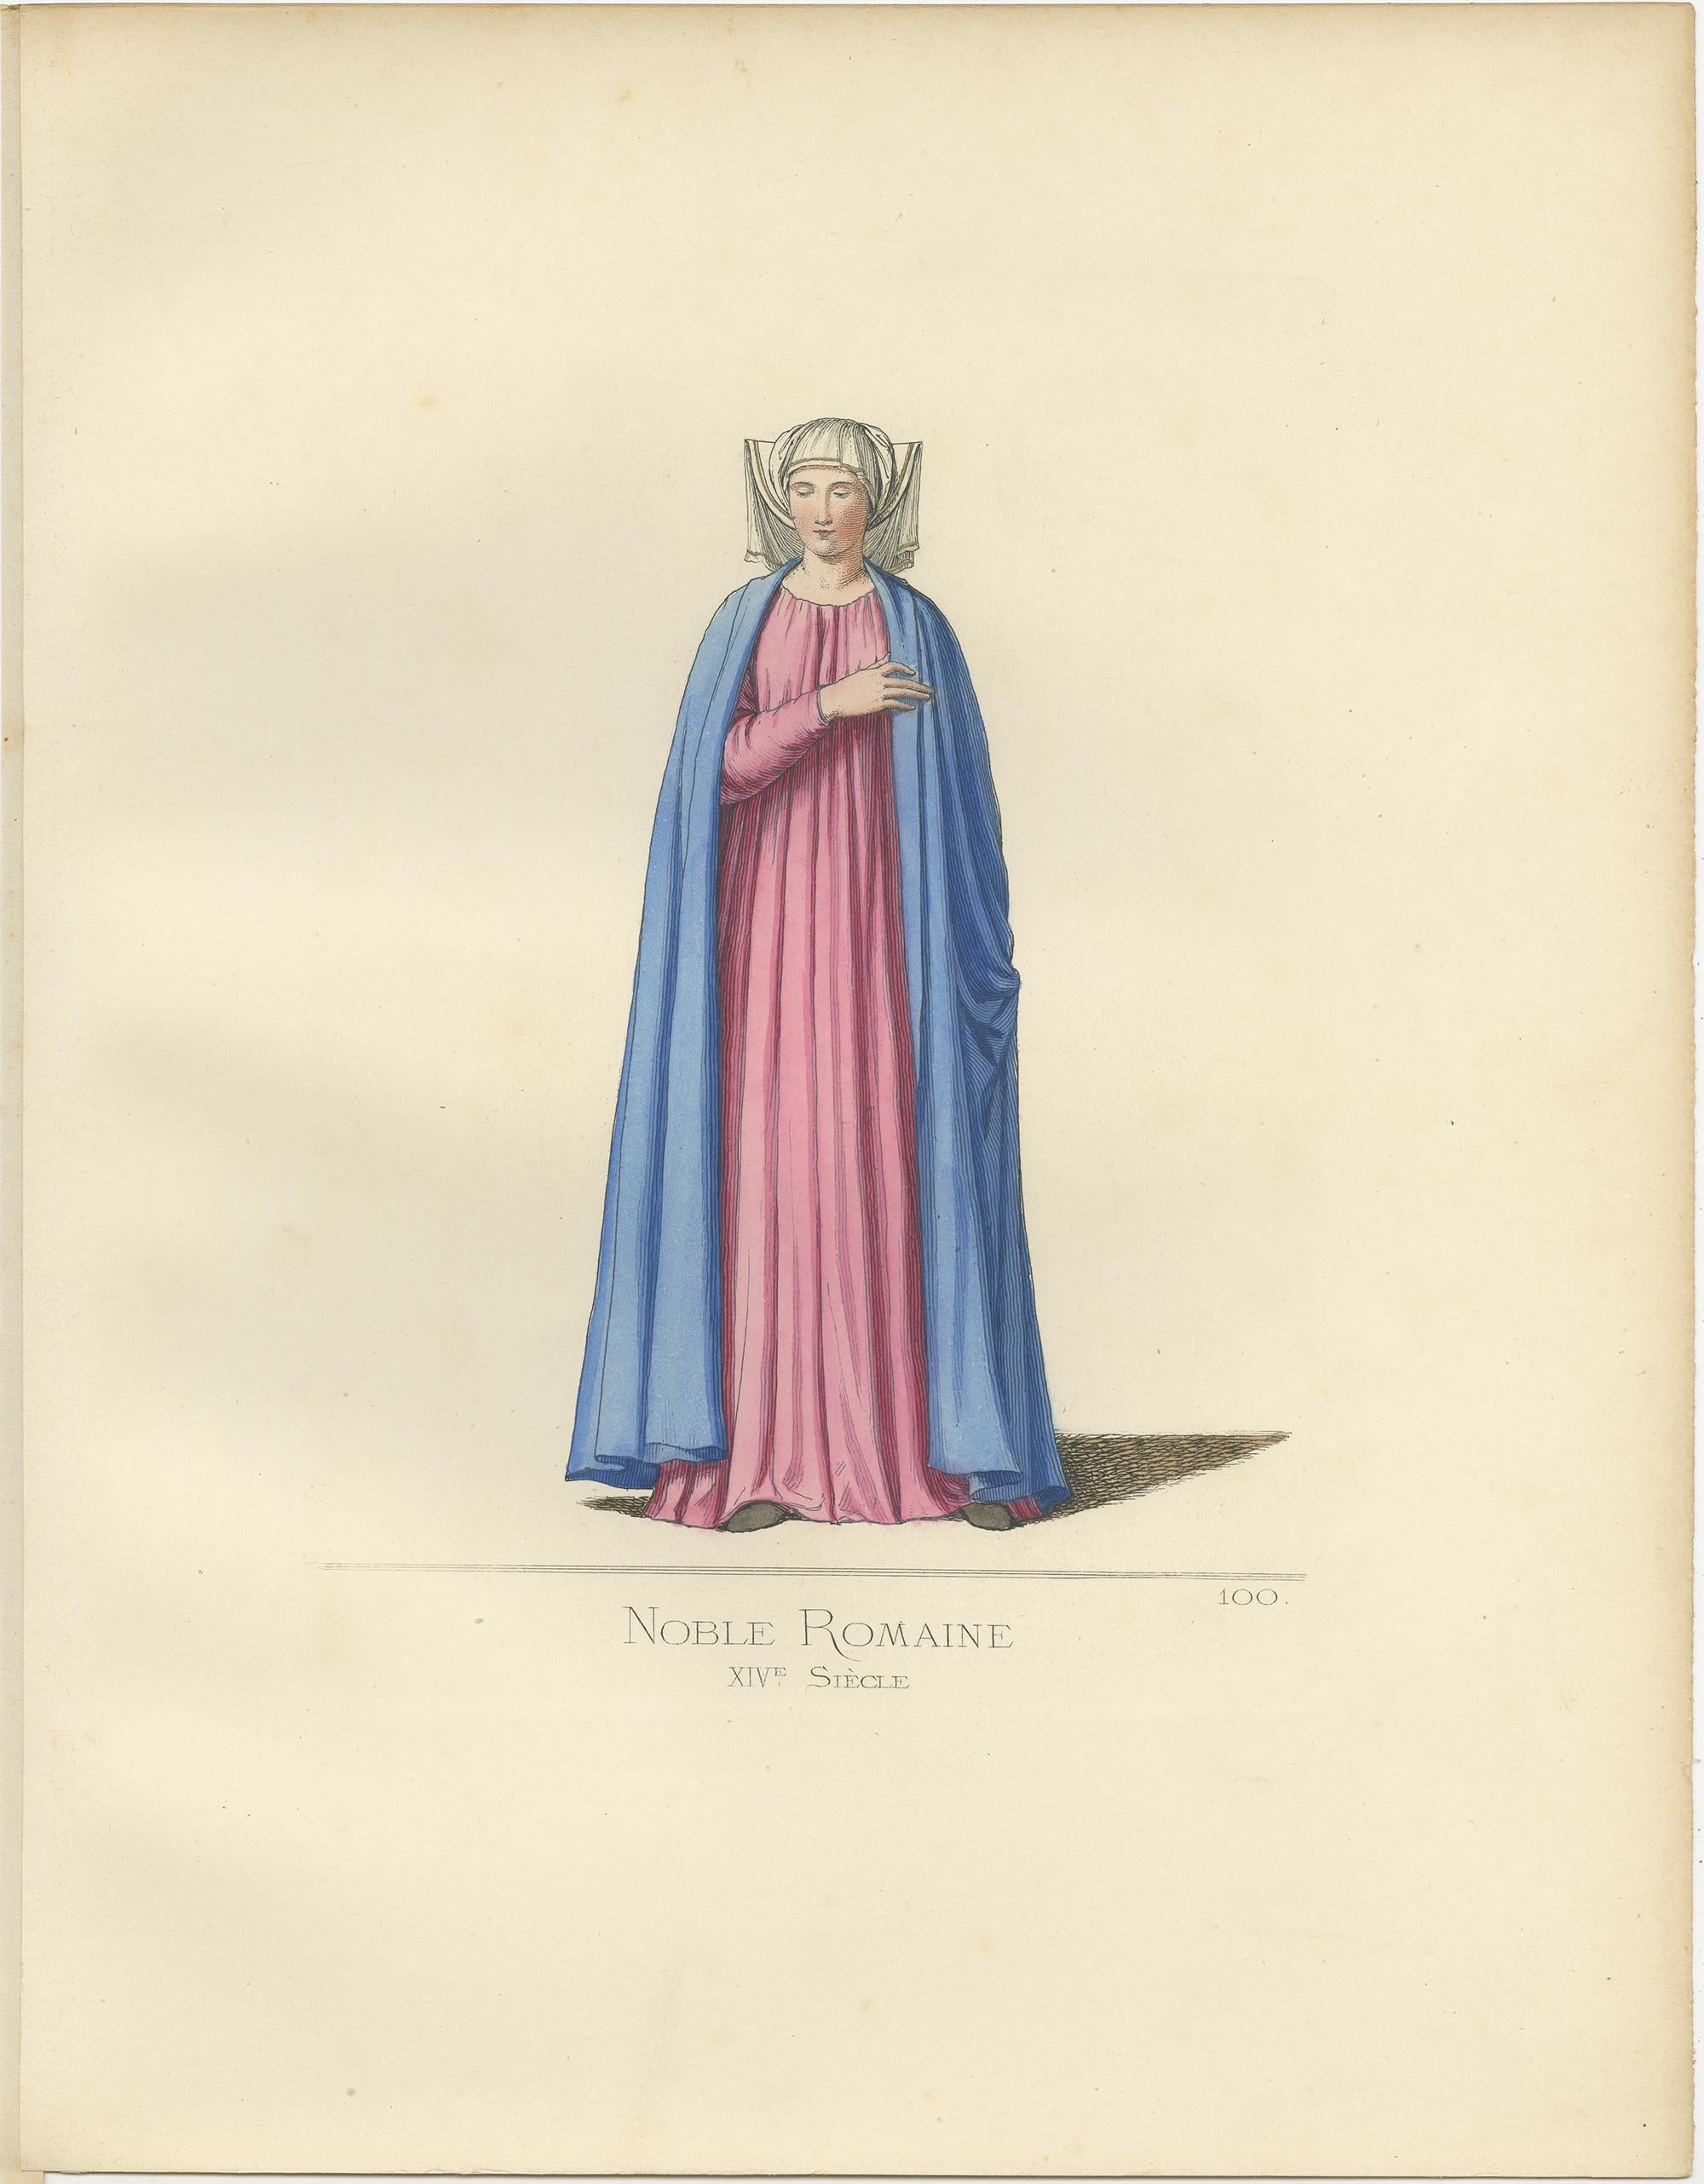 19th Century Antique Print of a Noblewoman from Rome, Italy, 14th Century, by Bonnard, 1860